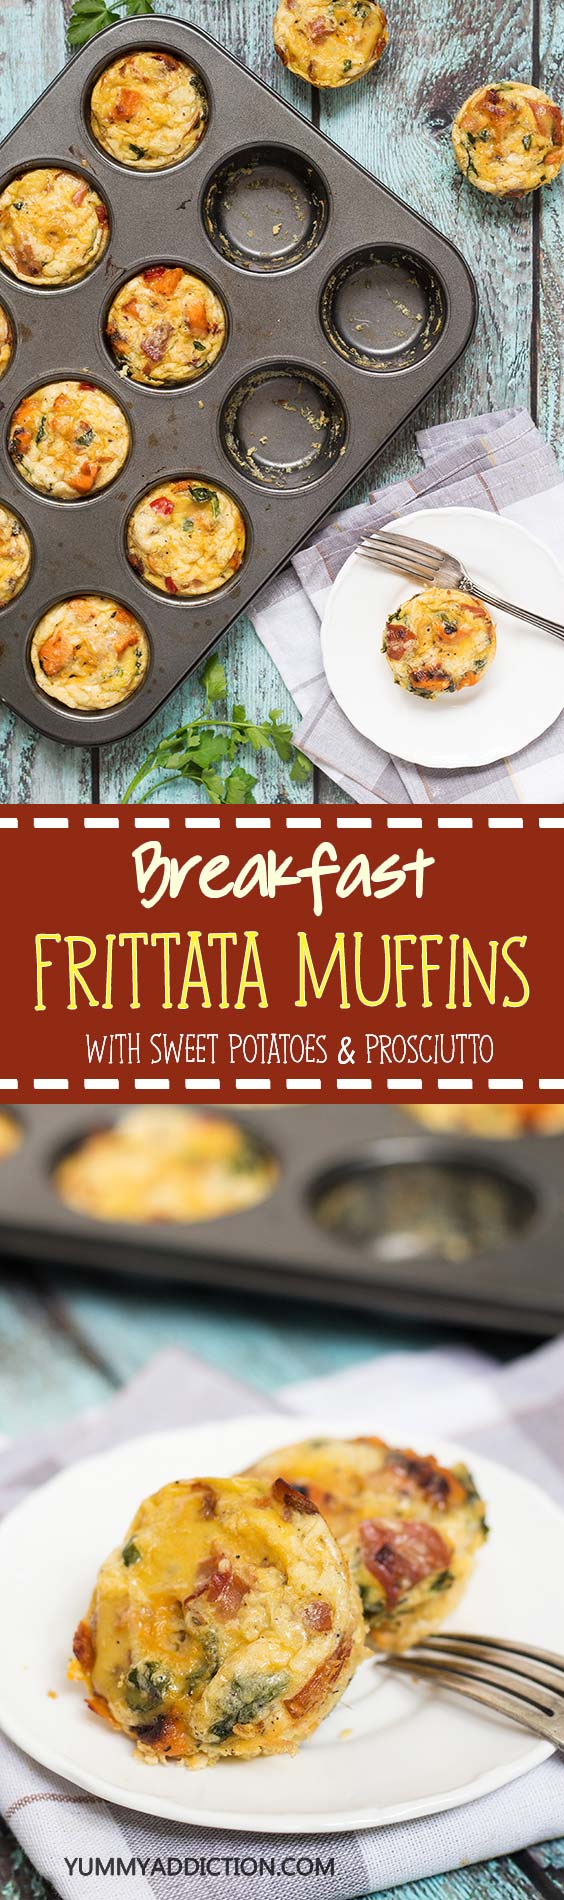 These individual sized frittata muffins are filled with sweet potatoes, spinach and prosciutto. Perfect for breakfast! | yummyaddiction.com